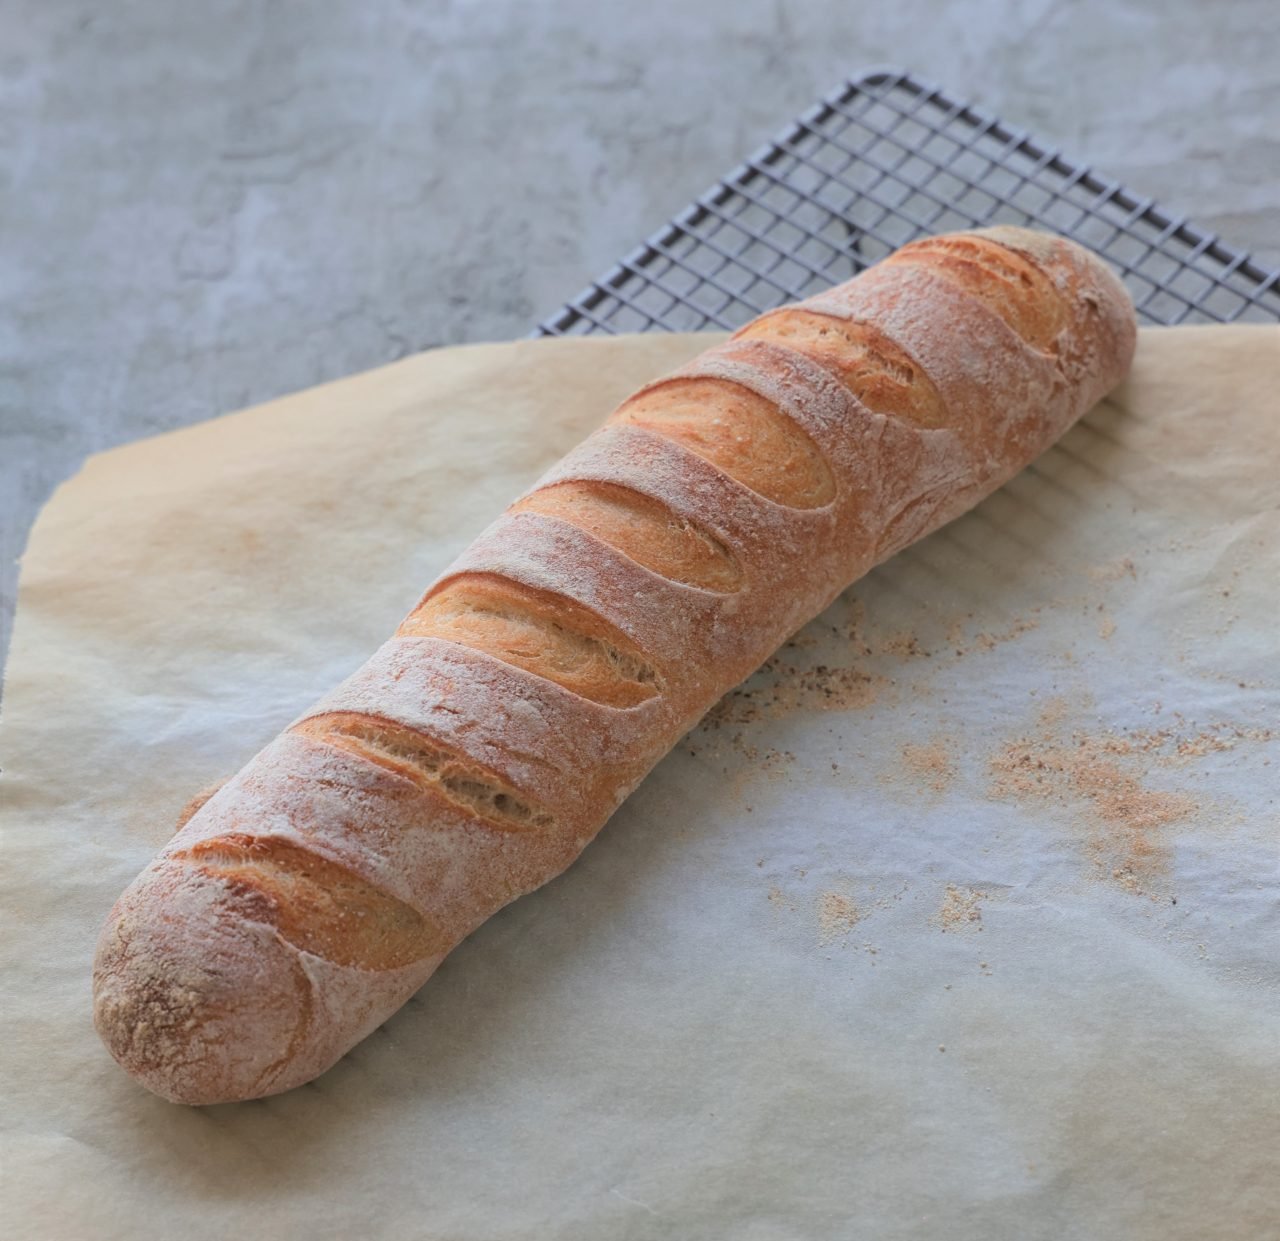 How to make a good French baguette at home, using basic supermarket ingredients and the simplest technique.